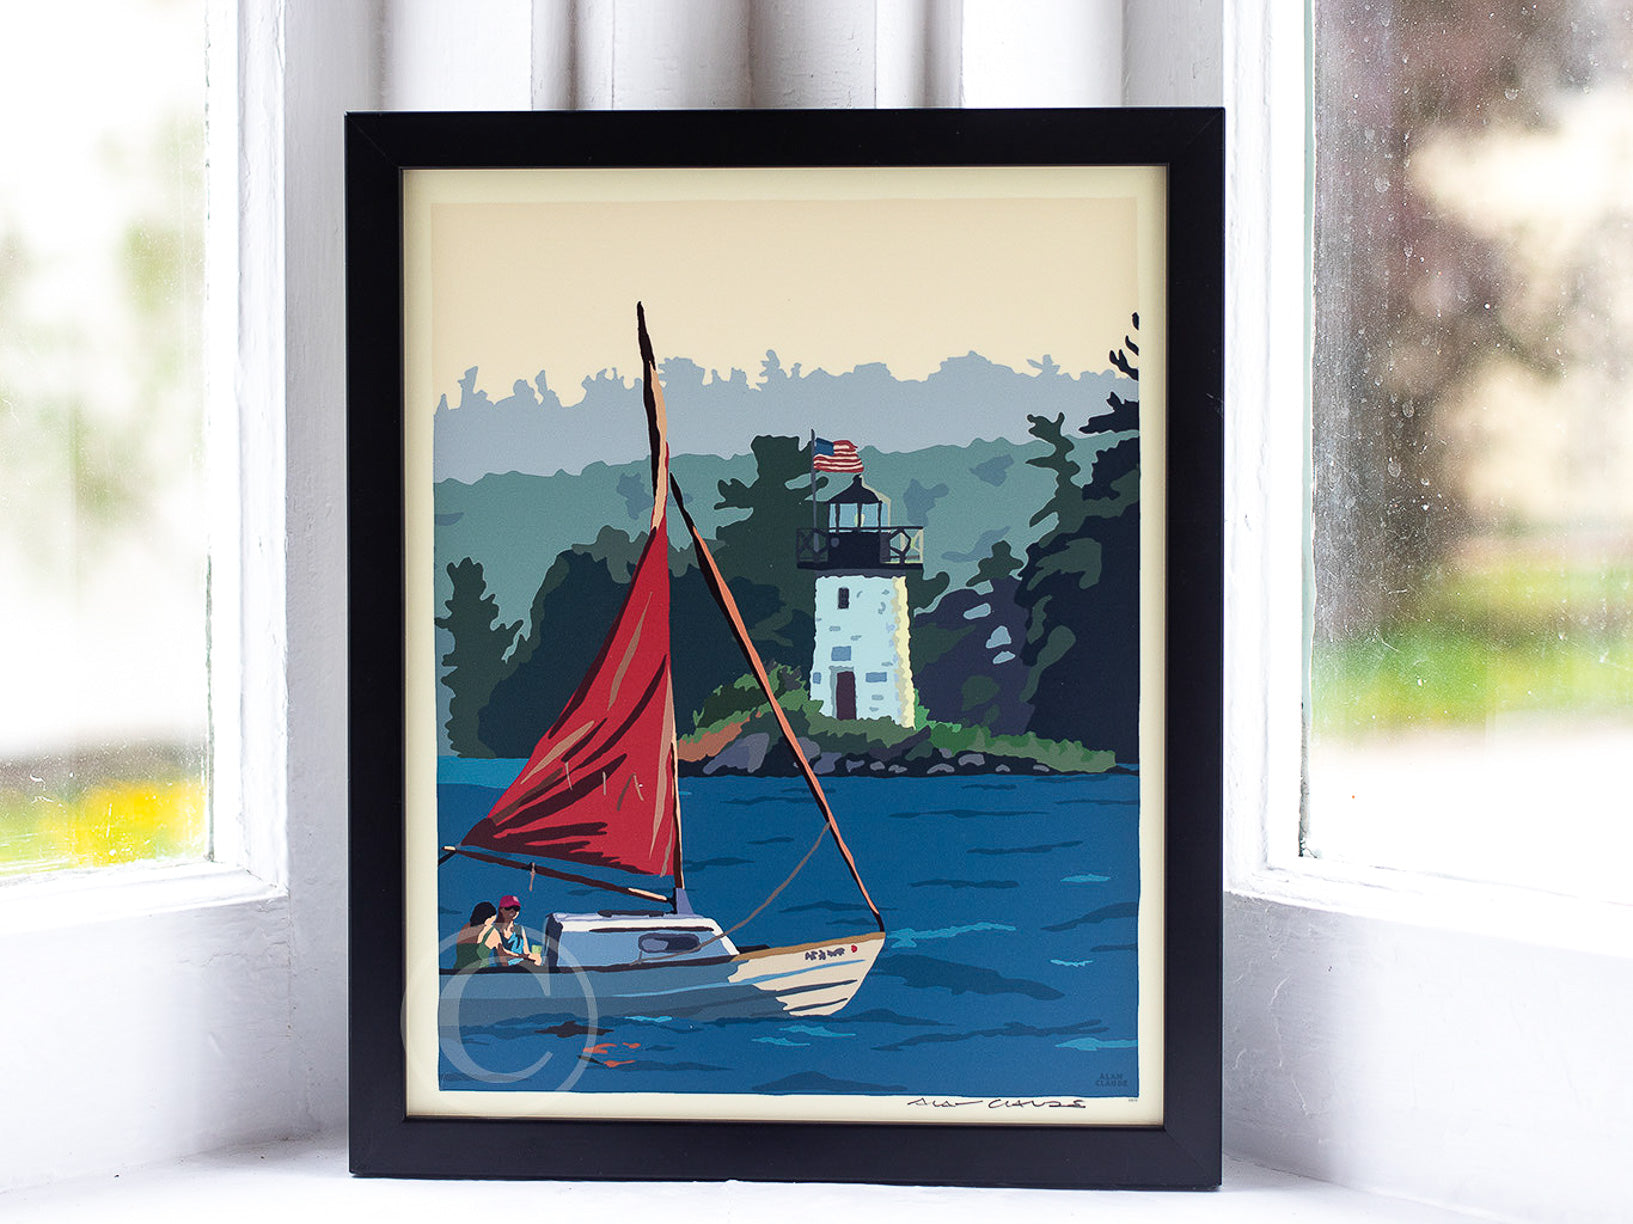 Sailing Ladies Delight Art Print 8" x 10" Framed Wall Poster By Alan Claude - Maine